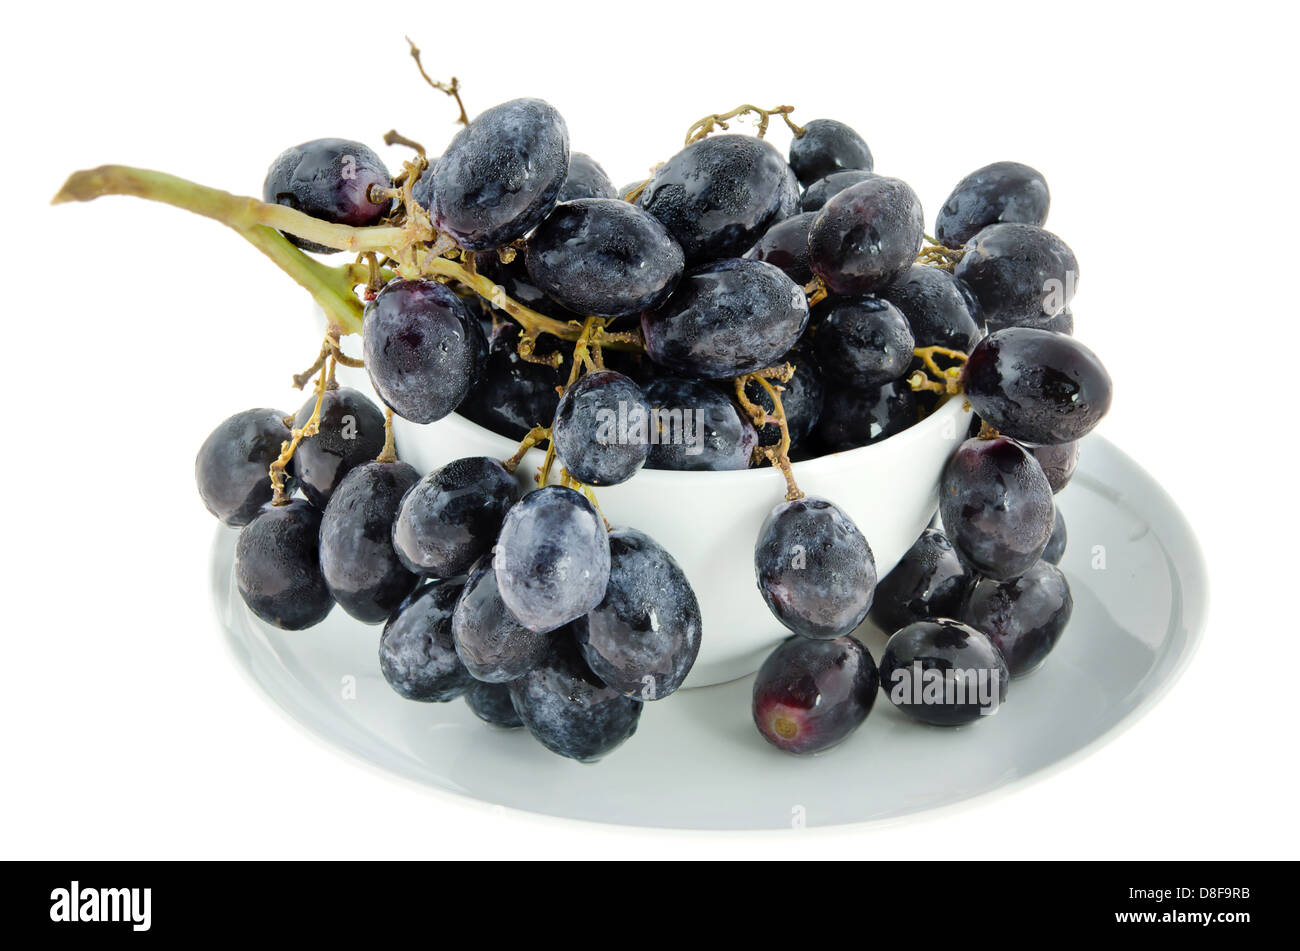 ripe grapes fruits in white bowl over white background Stock Photo